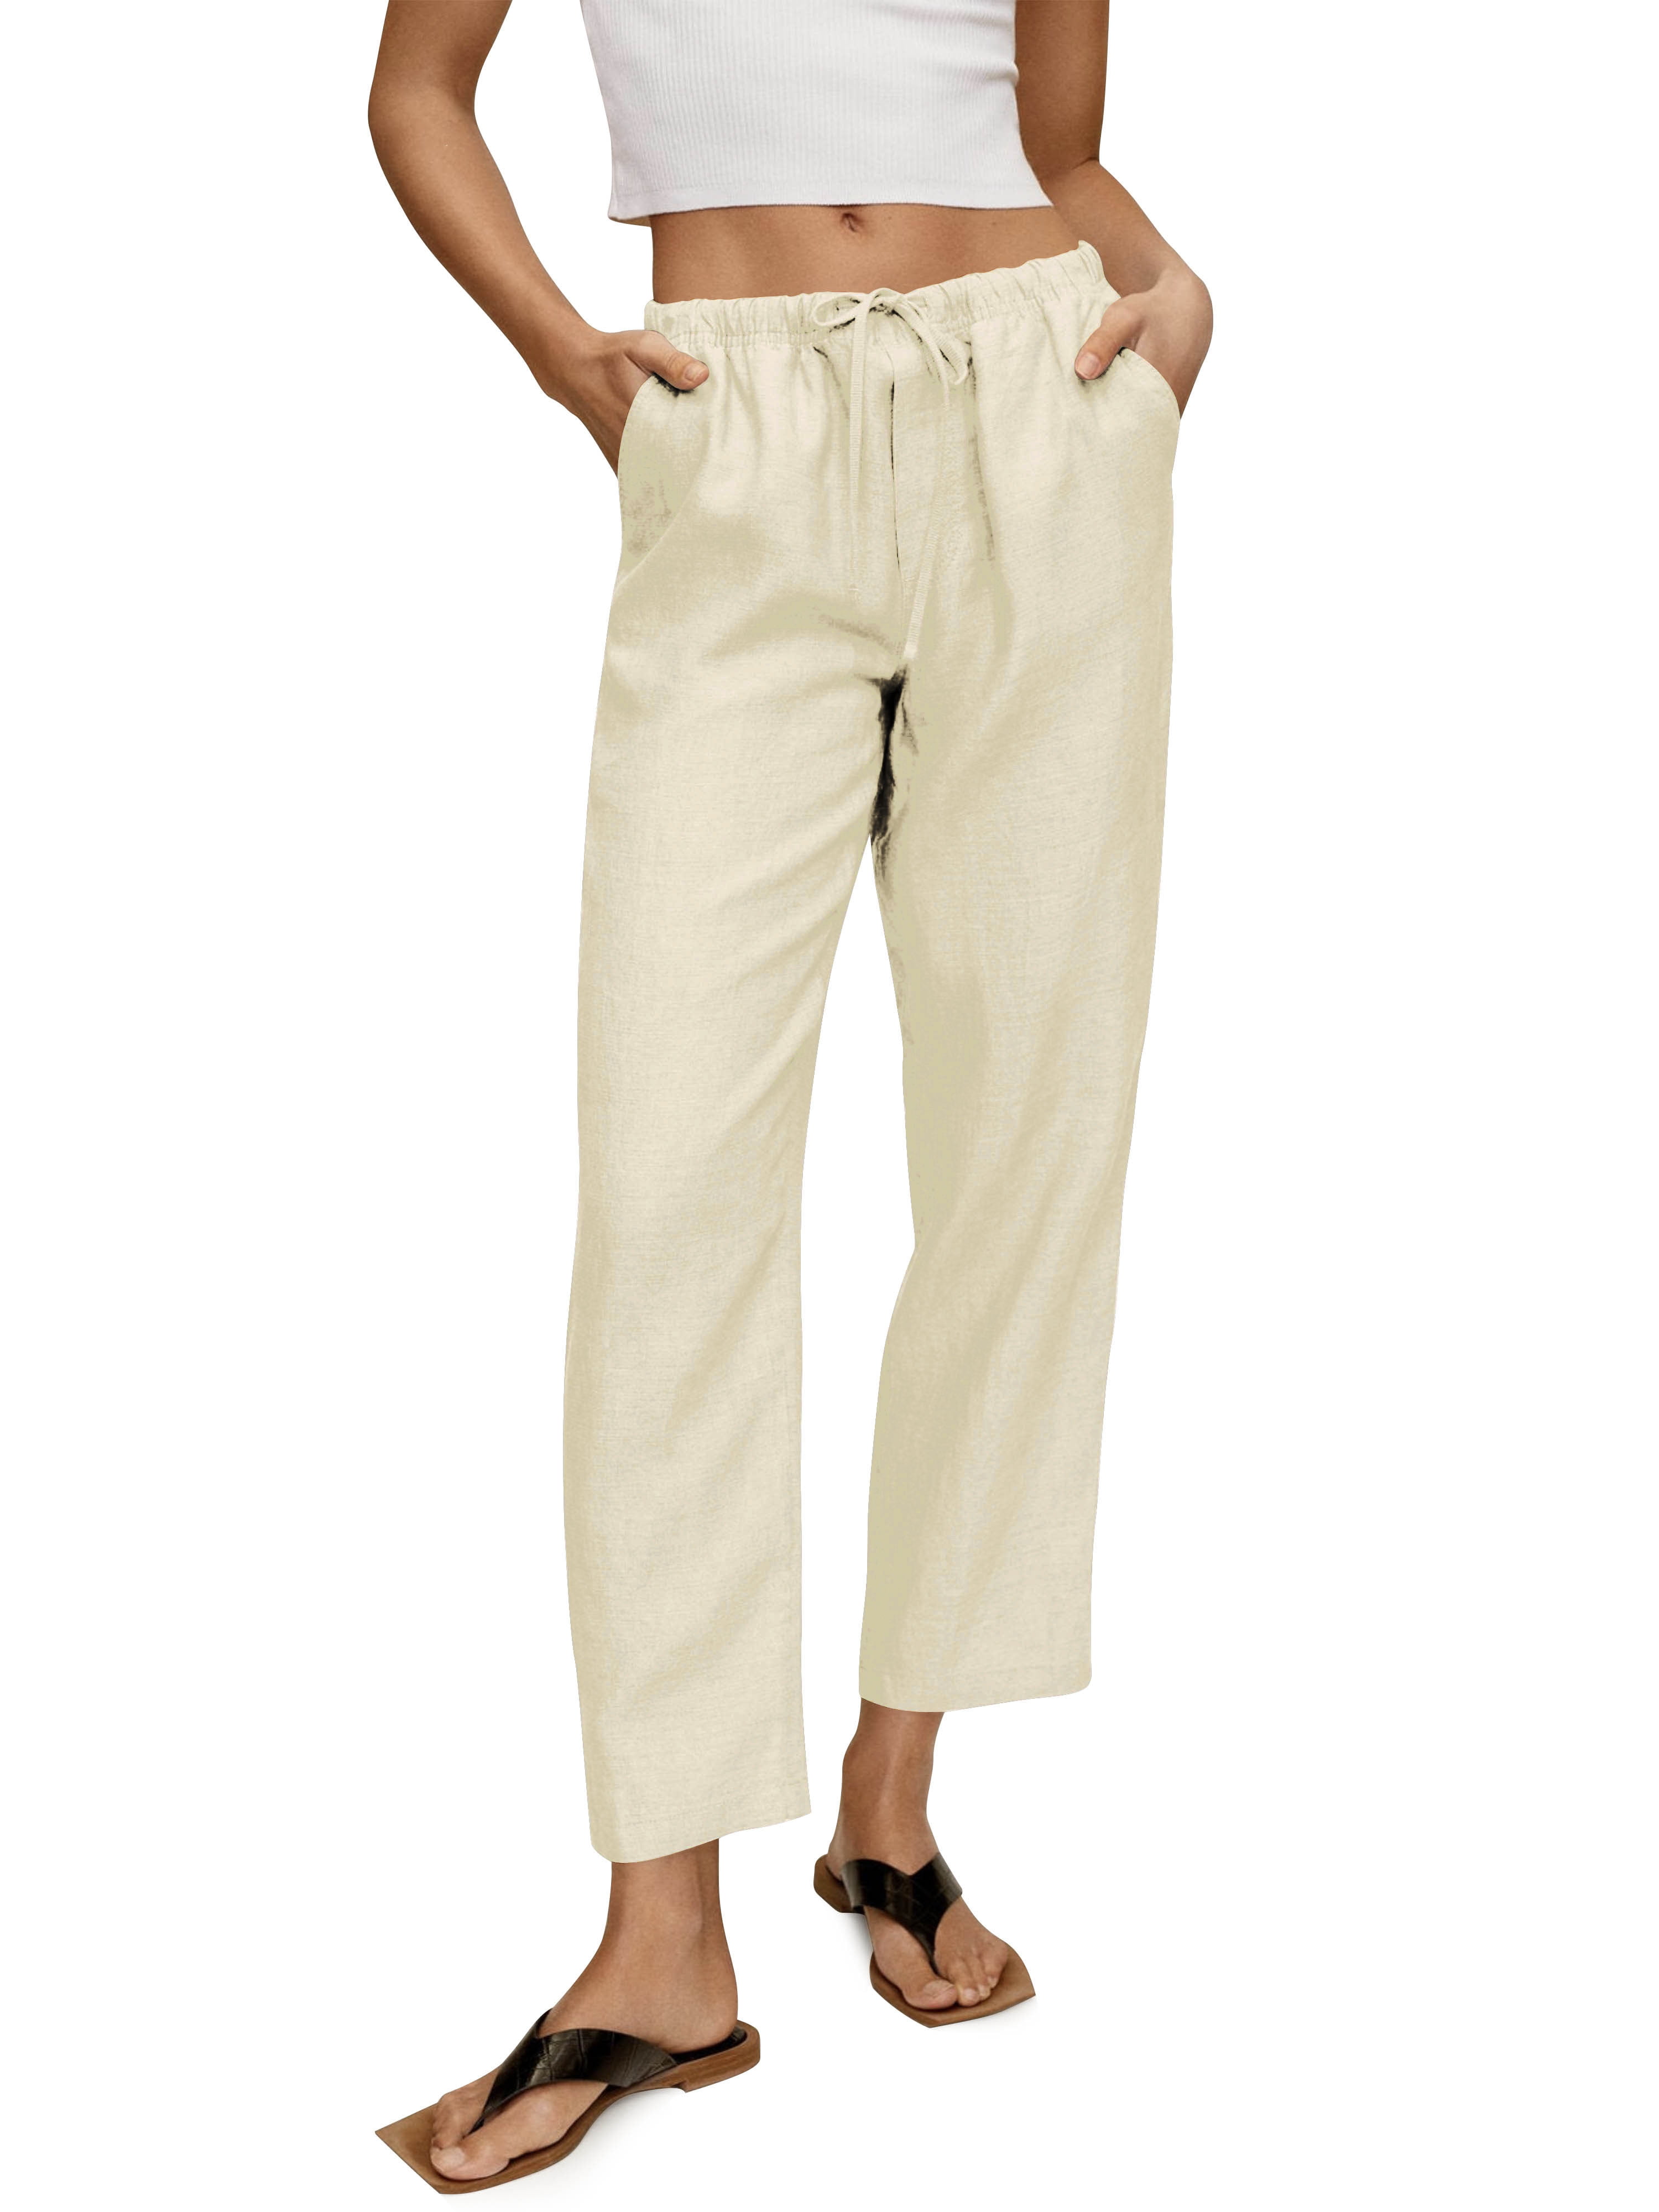 Hat and Beyond Women's Classic Slim-Fit Linen Pants with Waist